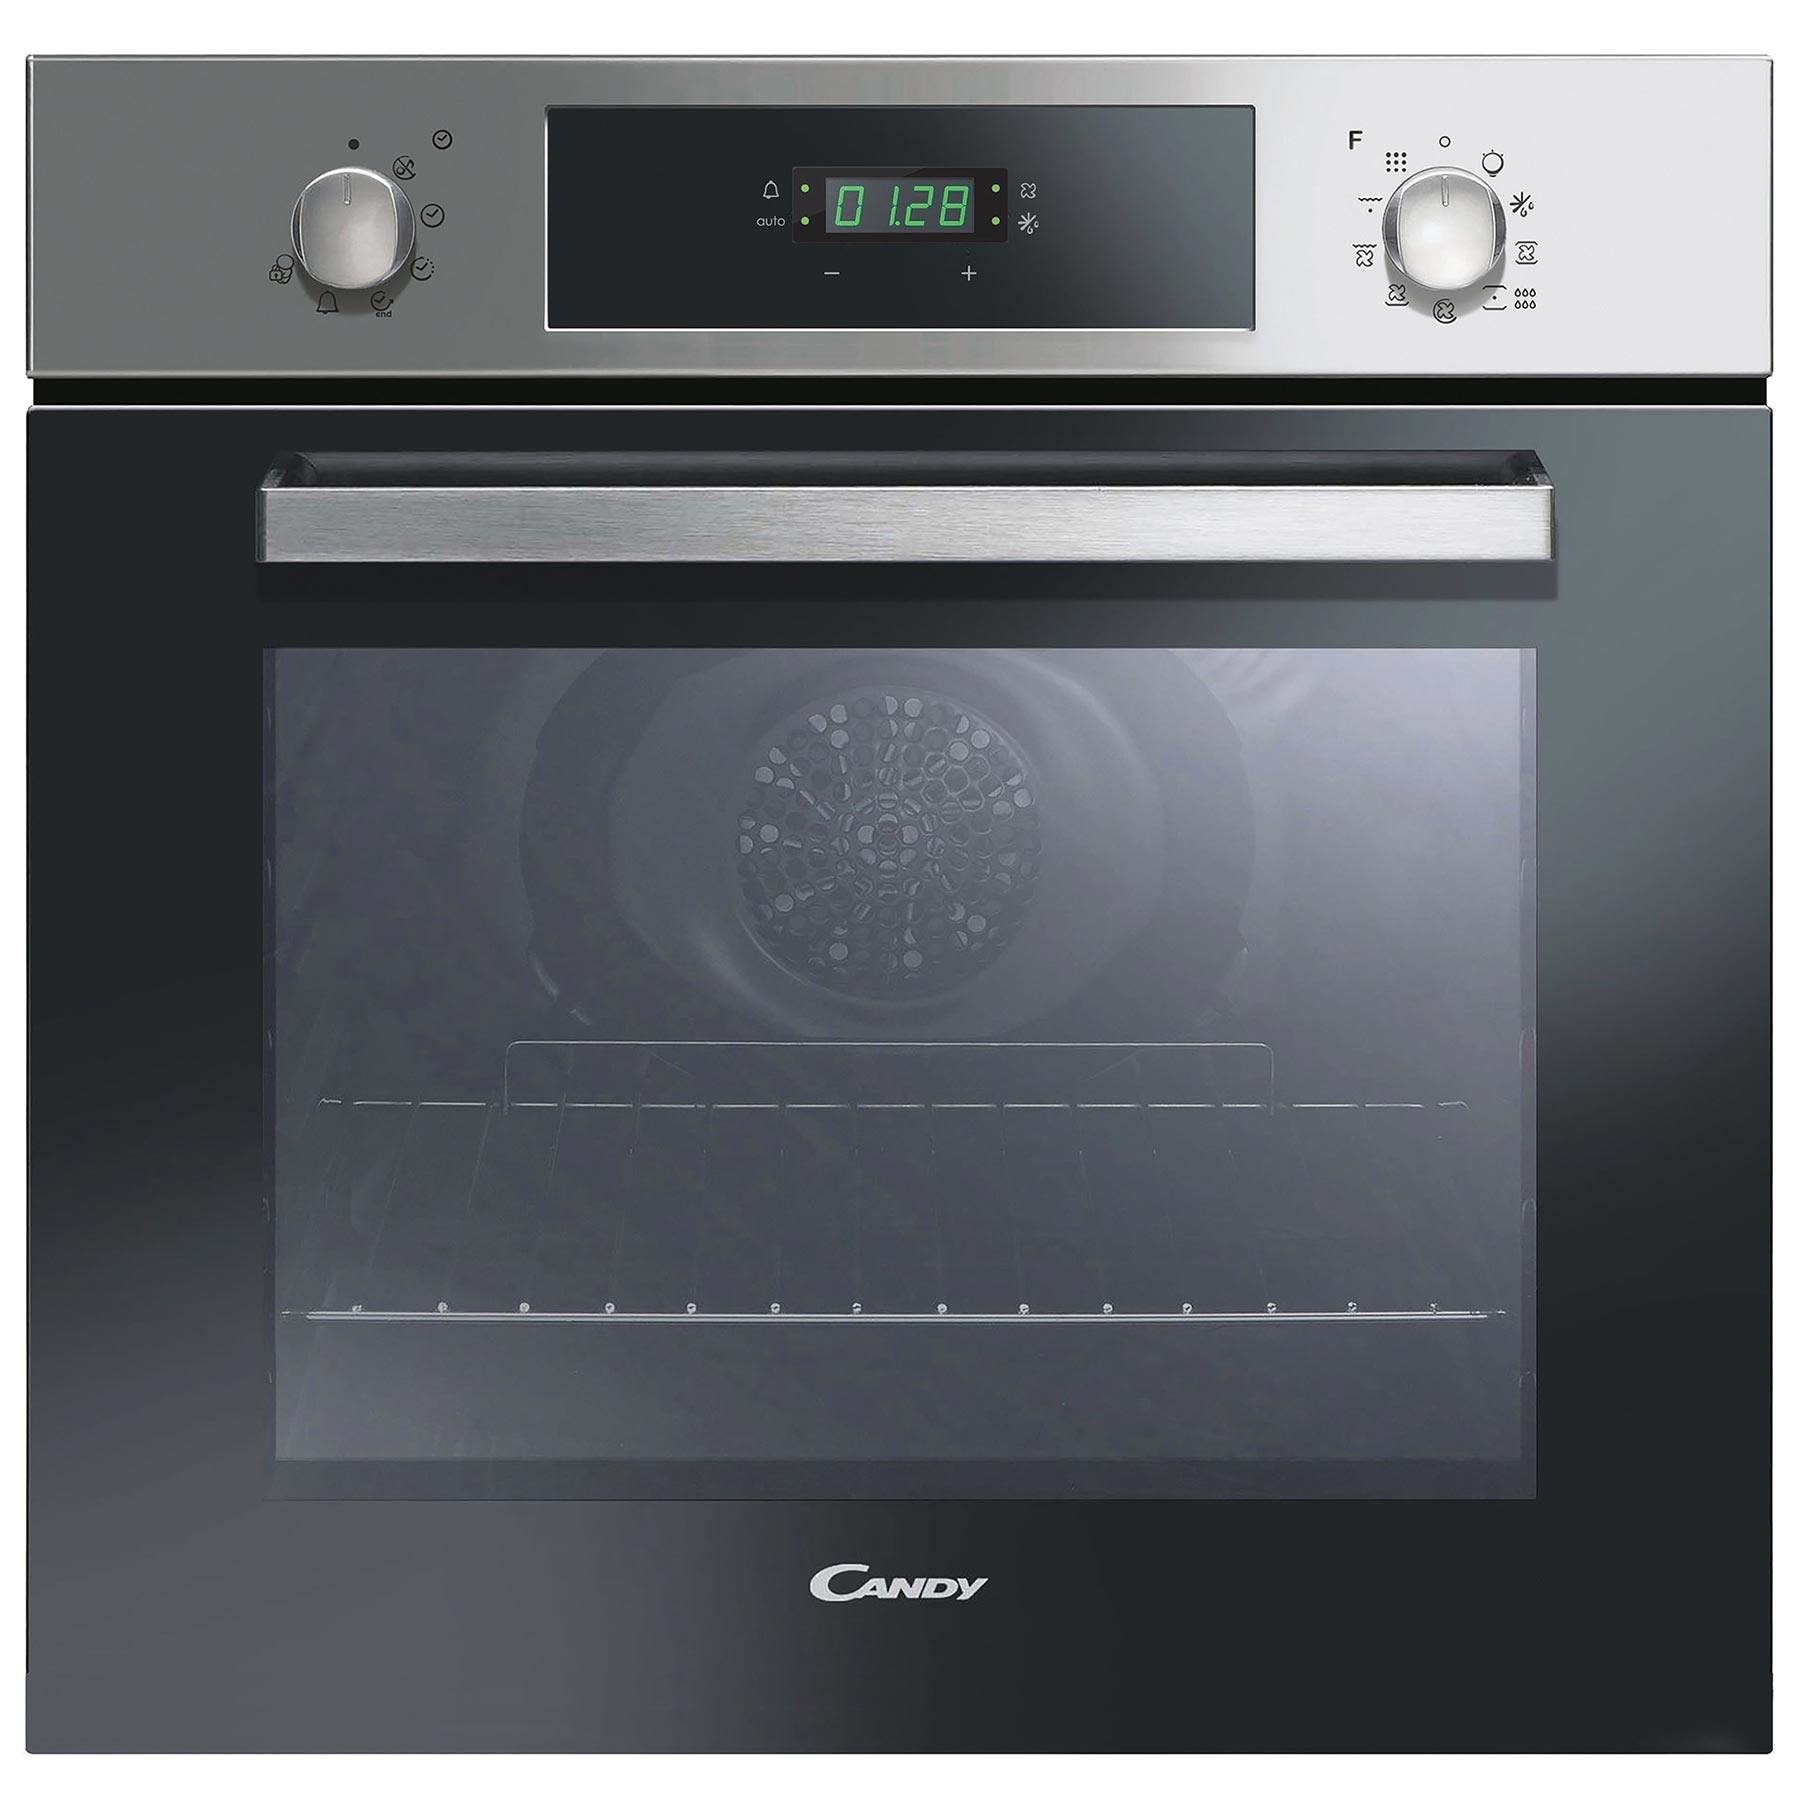 Image of Candy CELFP886X Built In Pyrolytic Electric Single Oven in St Steel 70